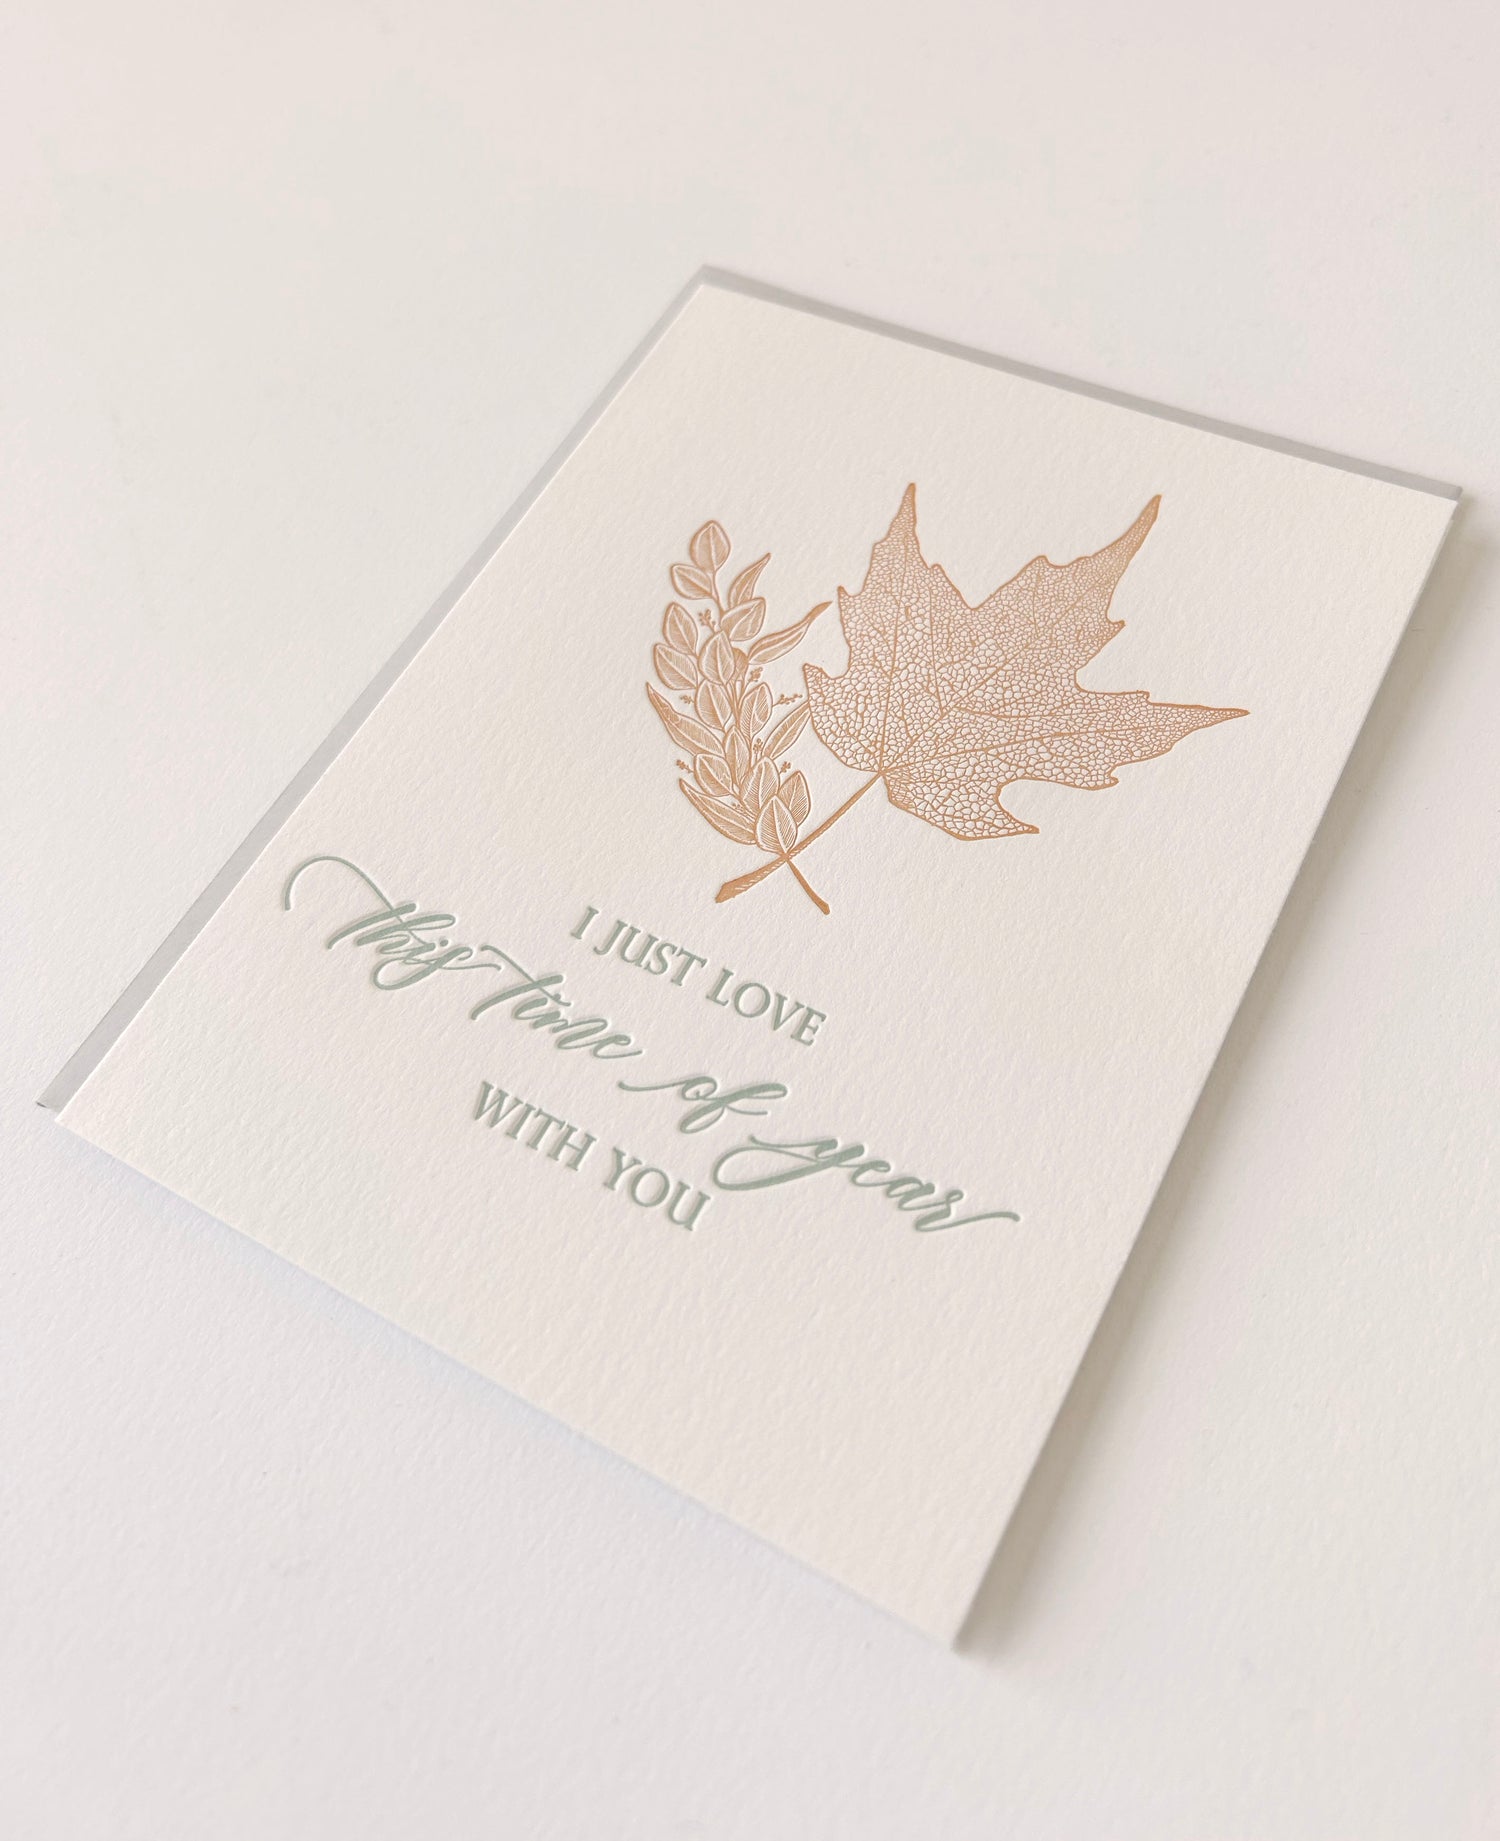 Letterpress love card with leaves that says "I Just Love This Time Of Year With You" by Rust Belt Love